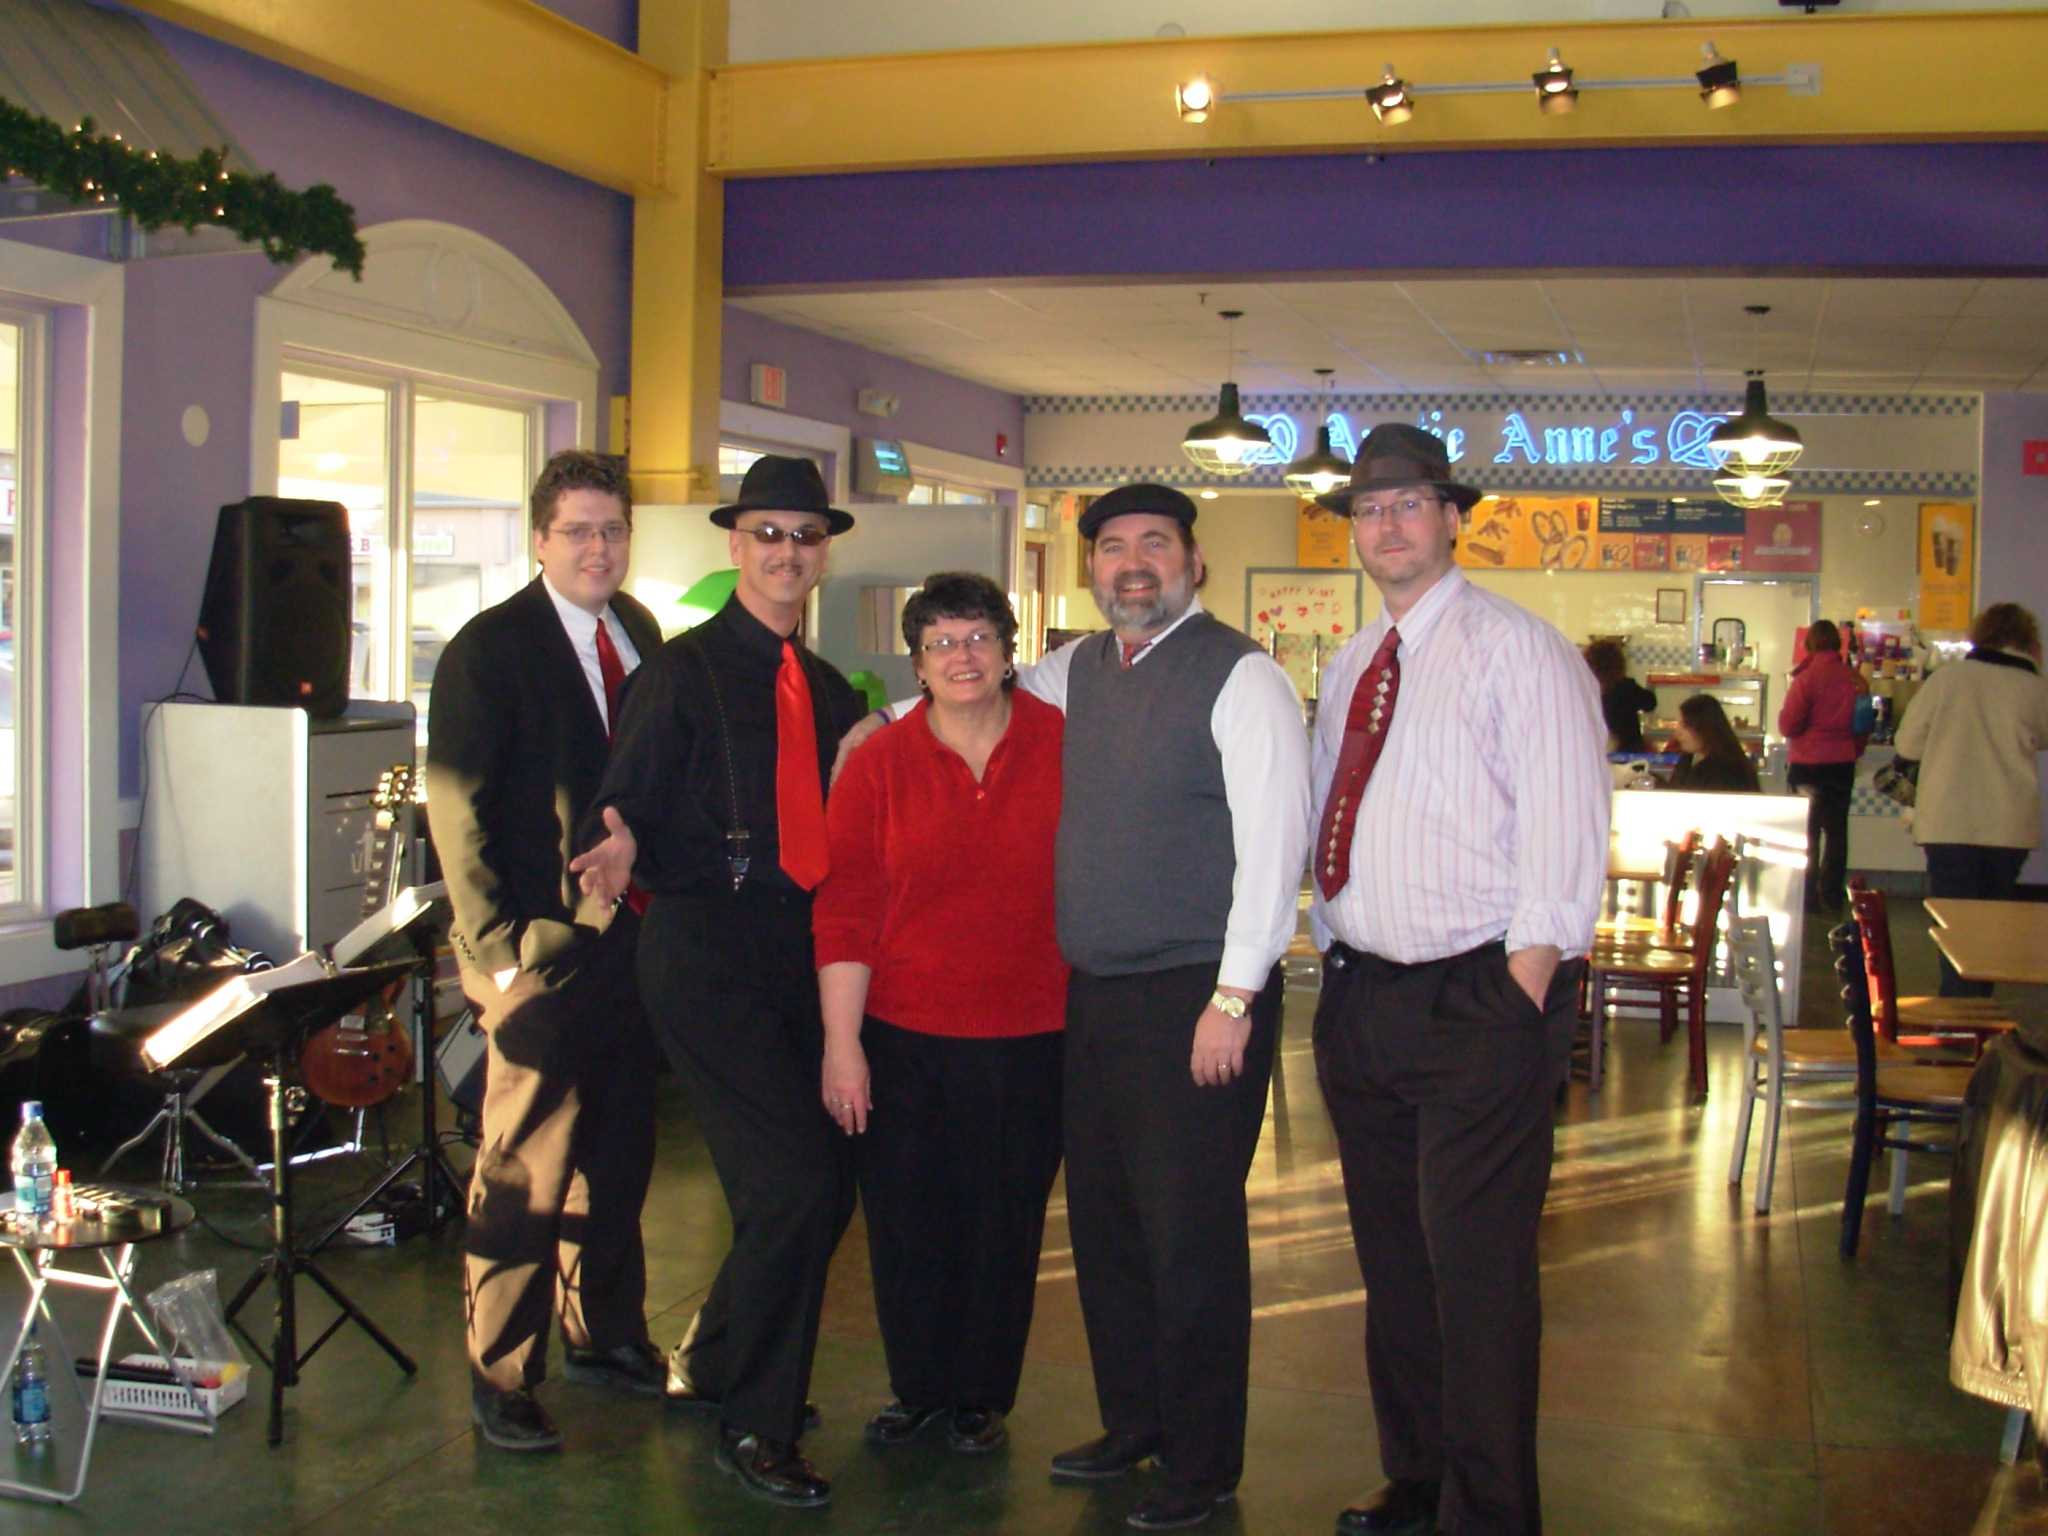 The Gettysburt Village Factory Store Show
Linda Gebhart was our host for the fun..and well attended Valentine's weekend performance in the Food Court
